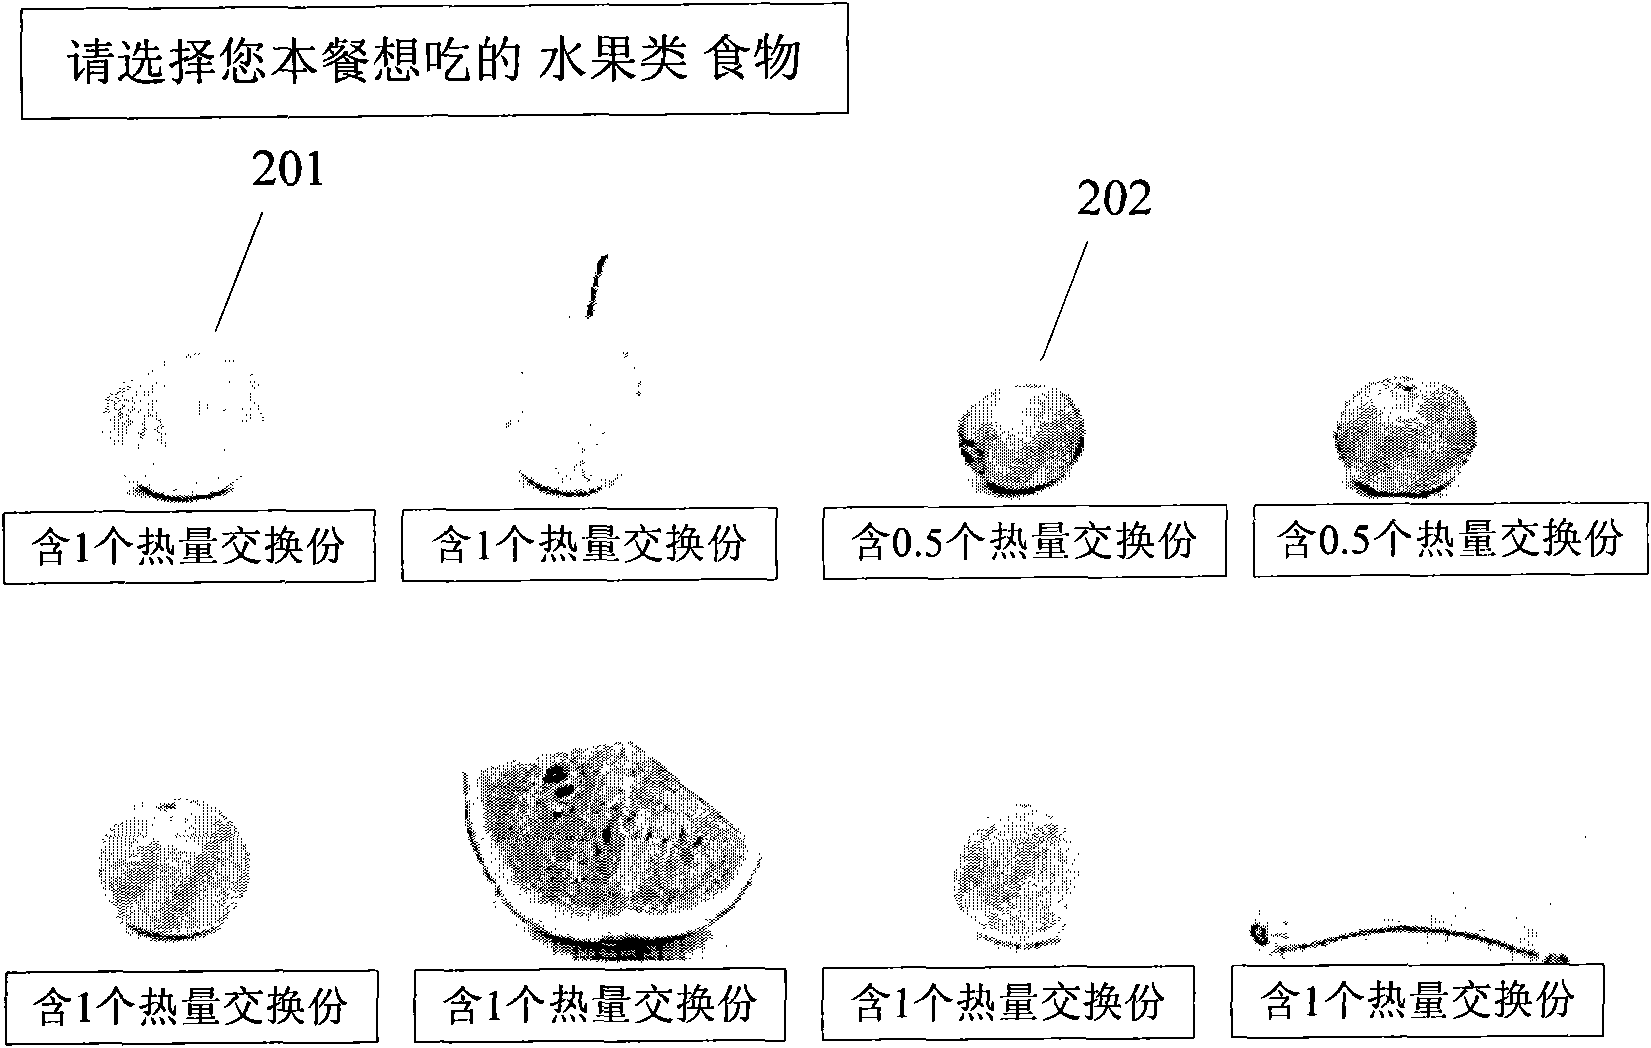 Information processing device, method, corresponding equipment and reagent carrier